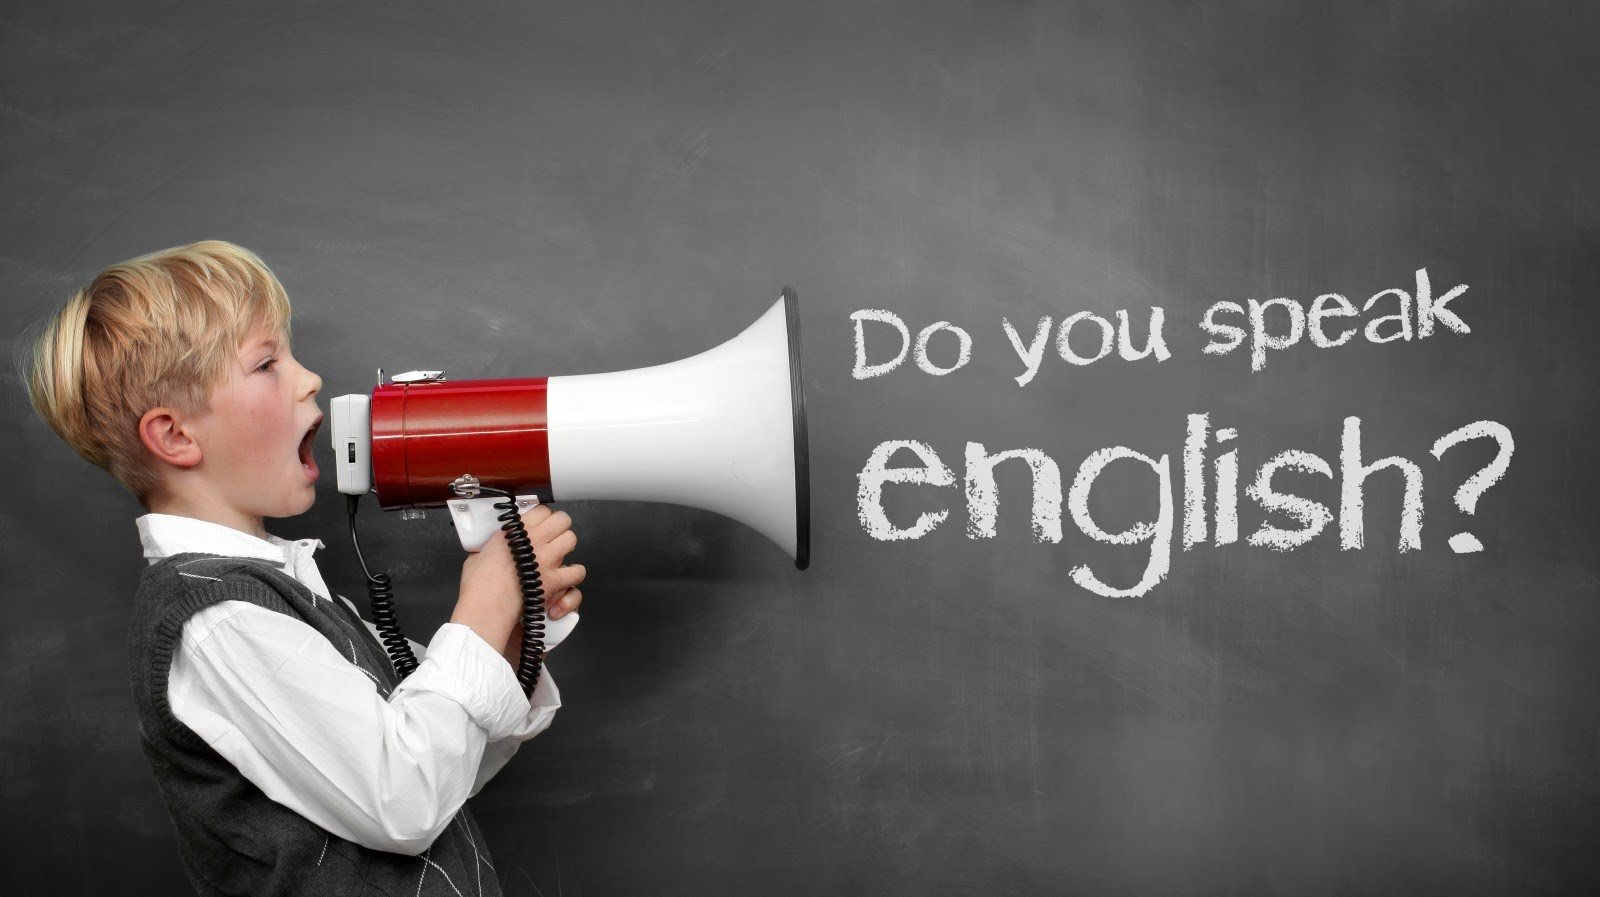 An English Speaking Environment Highly Improves English Skills